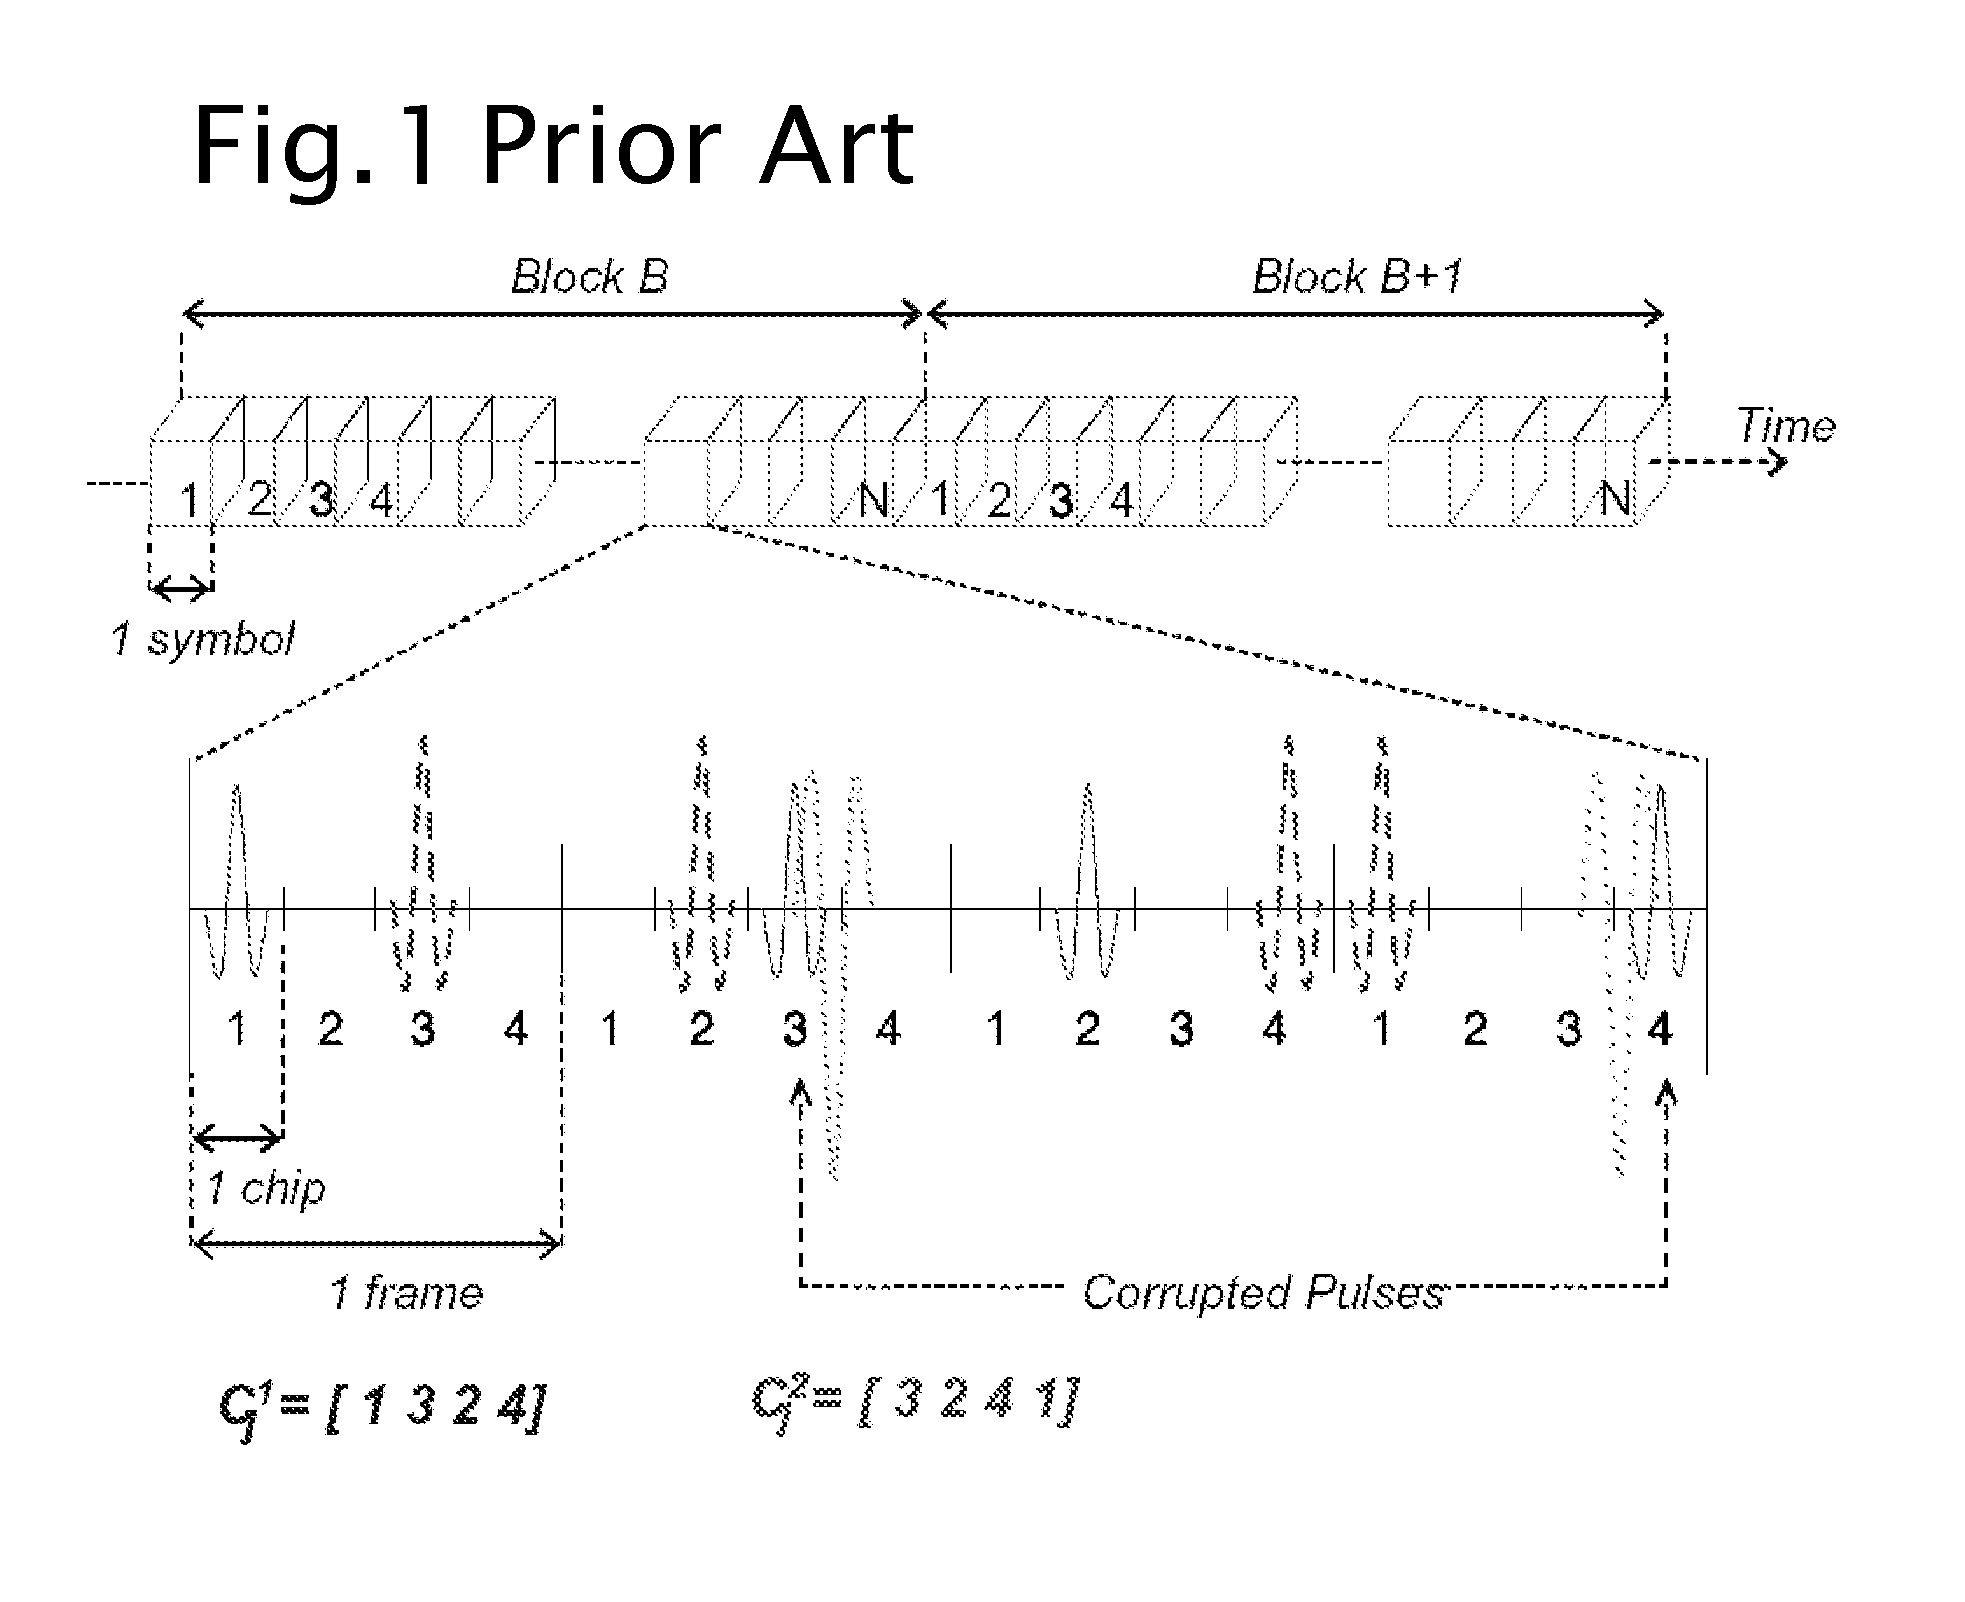 Cognitive Ultrawideband-Orthogonal Frequency Division Multiplexing